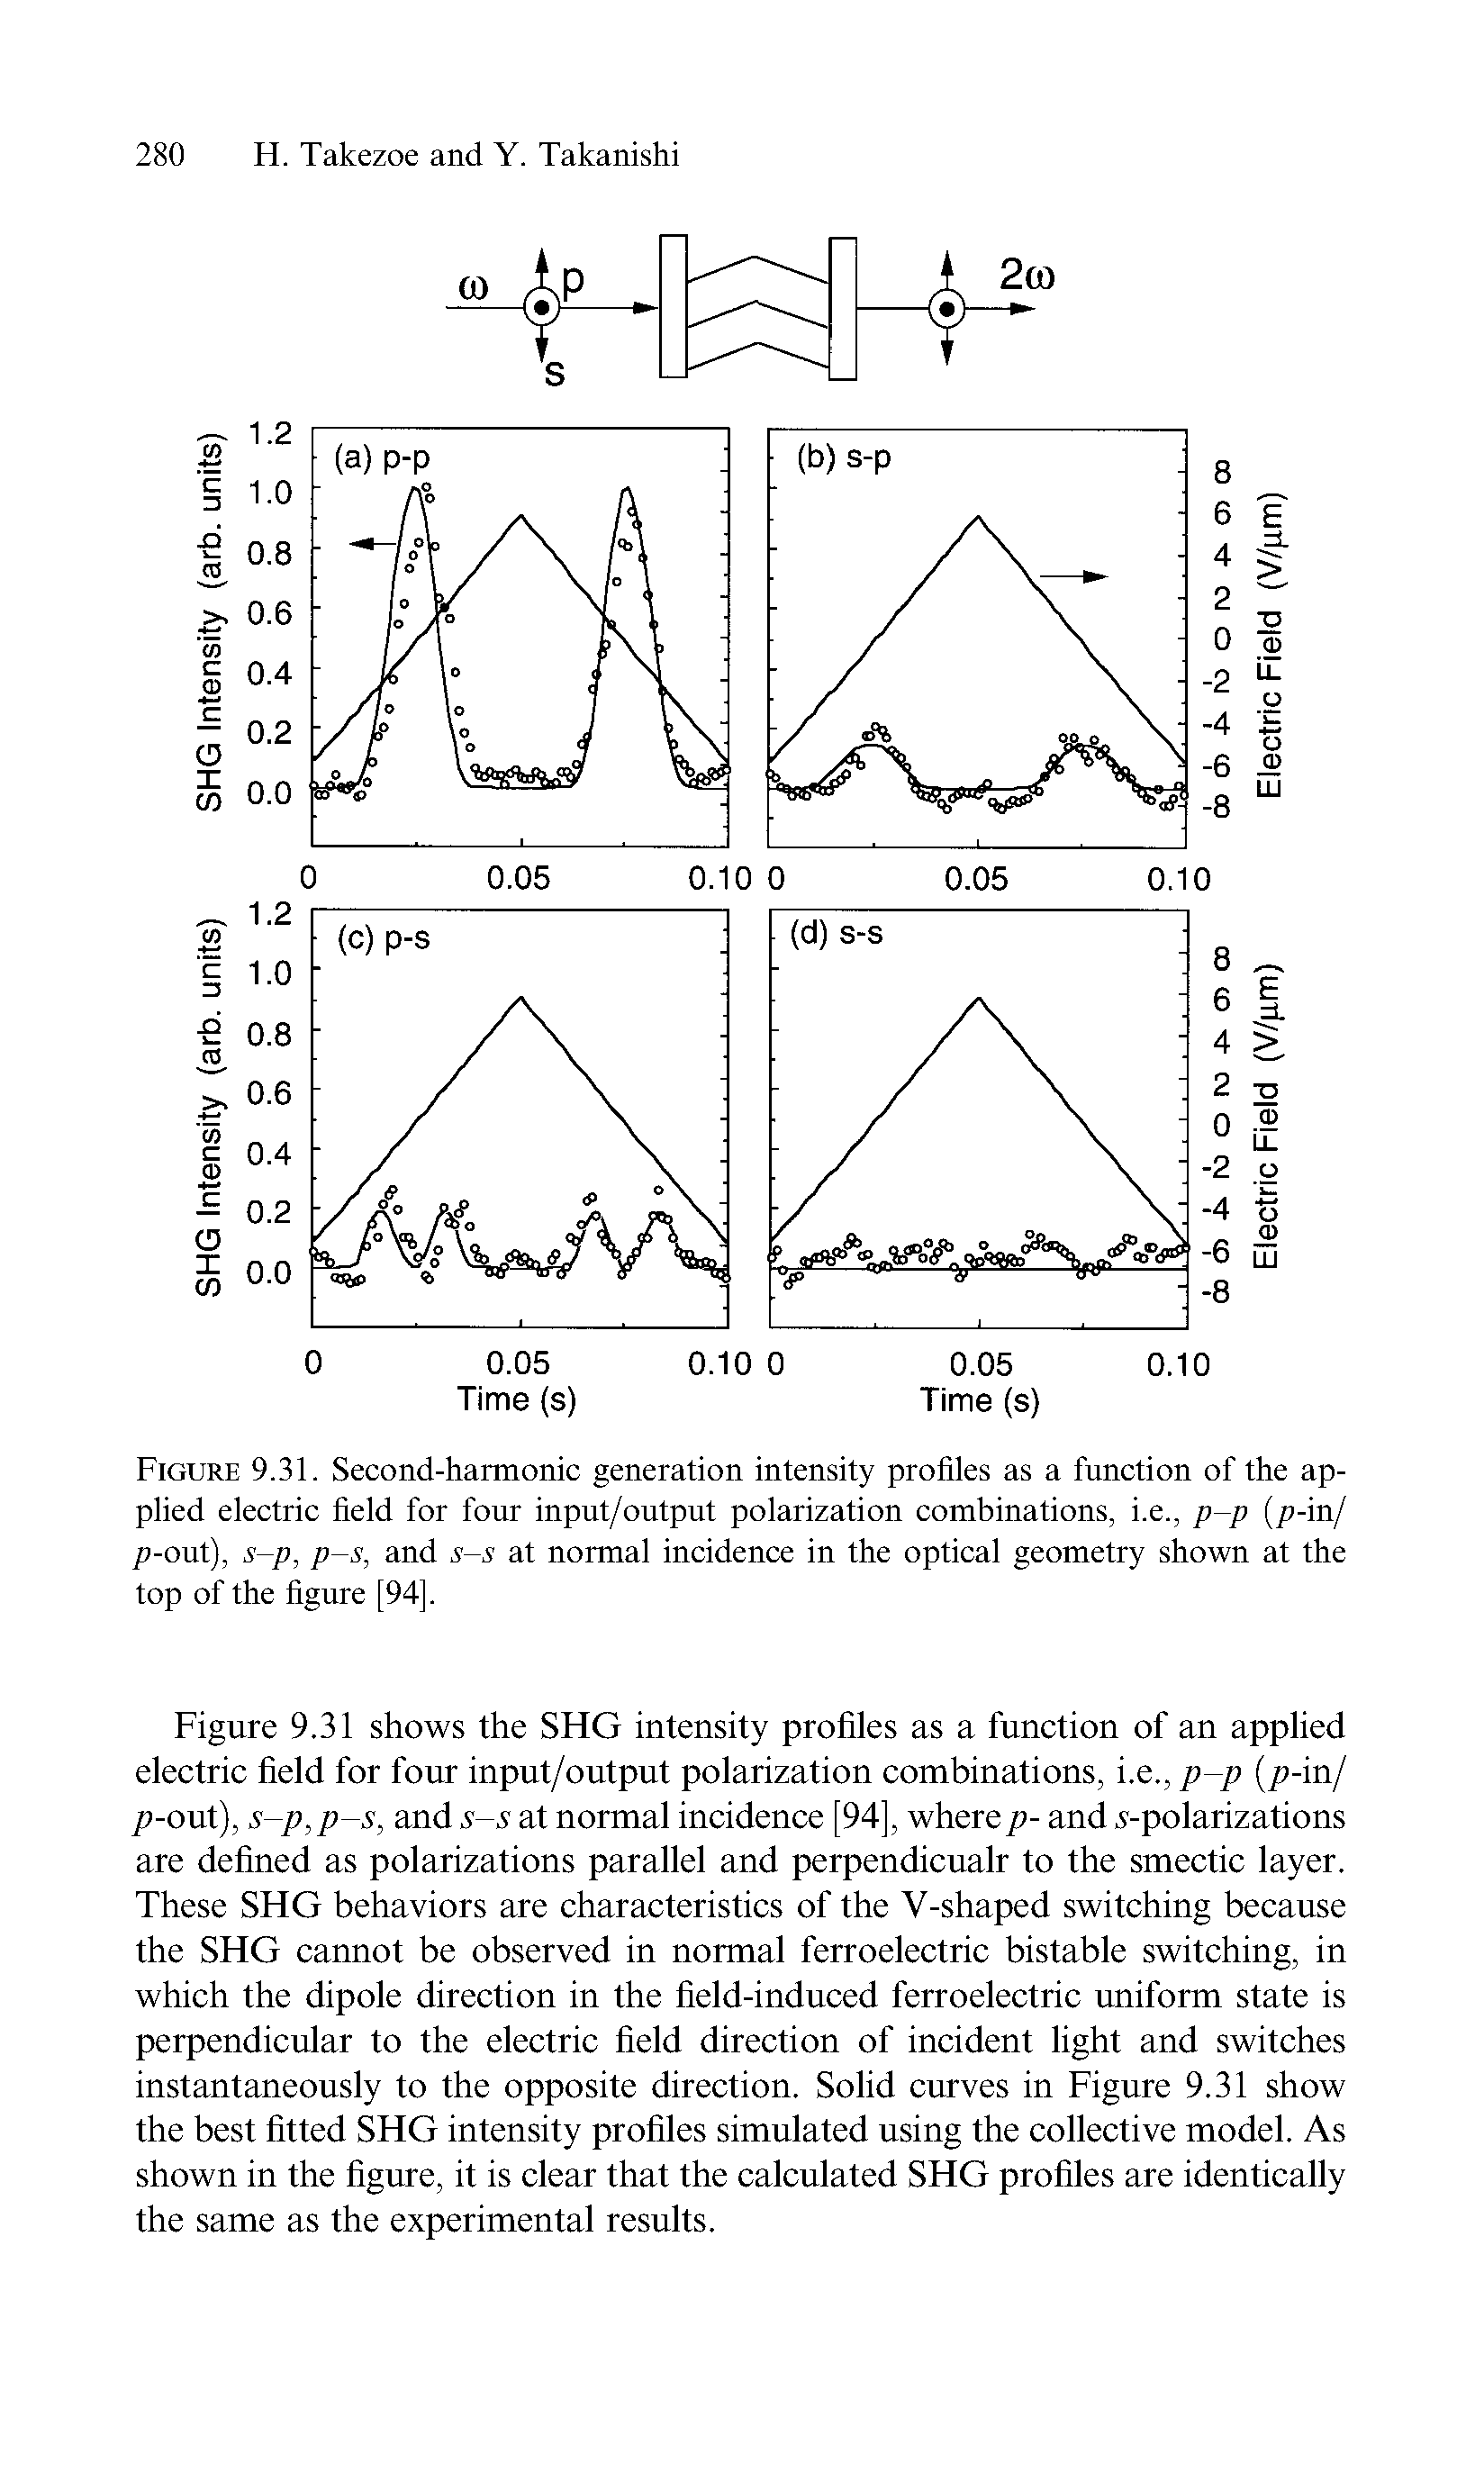 Figure 9.31. Second-harmonic generation intensity profiles as a function of the applied electric field for four input/output polarization combinations, i.e., p-p [p-in/ /3-out), s-p, p-s, and s-s at normal incidence in the optical geometry shown at the top of the figure [94].